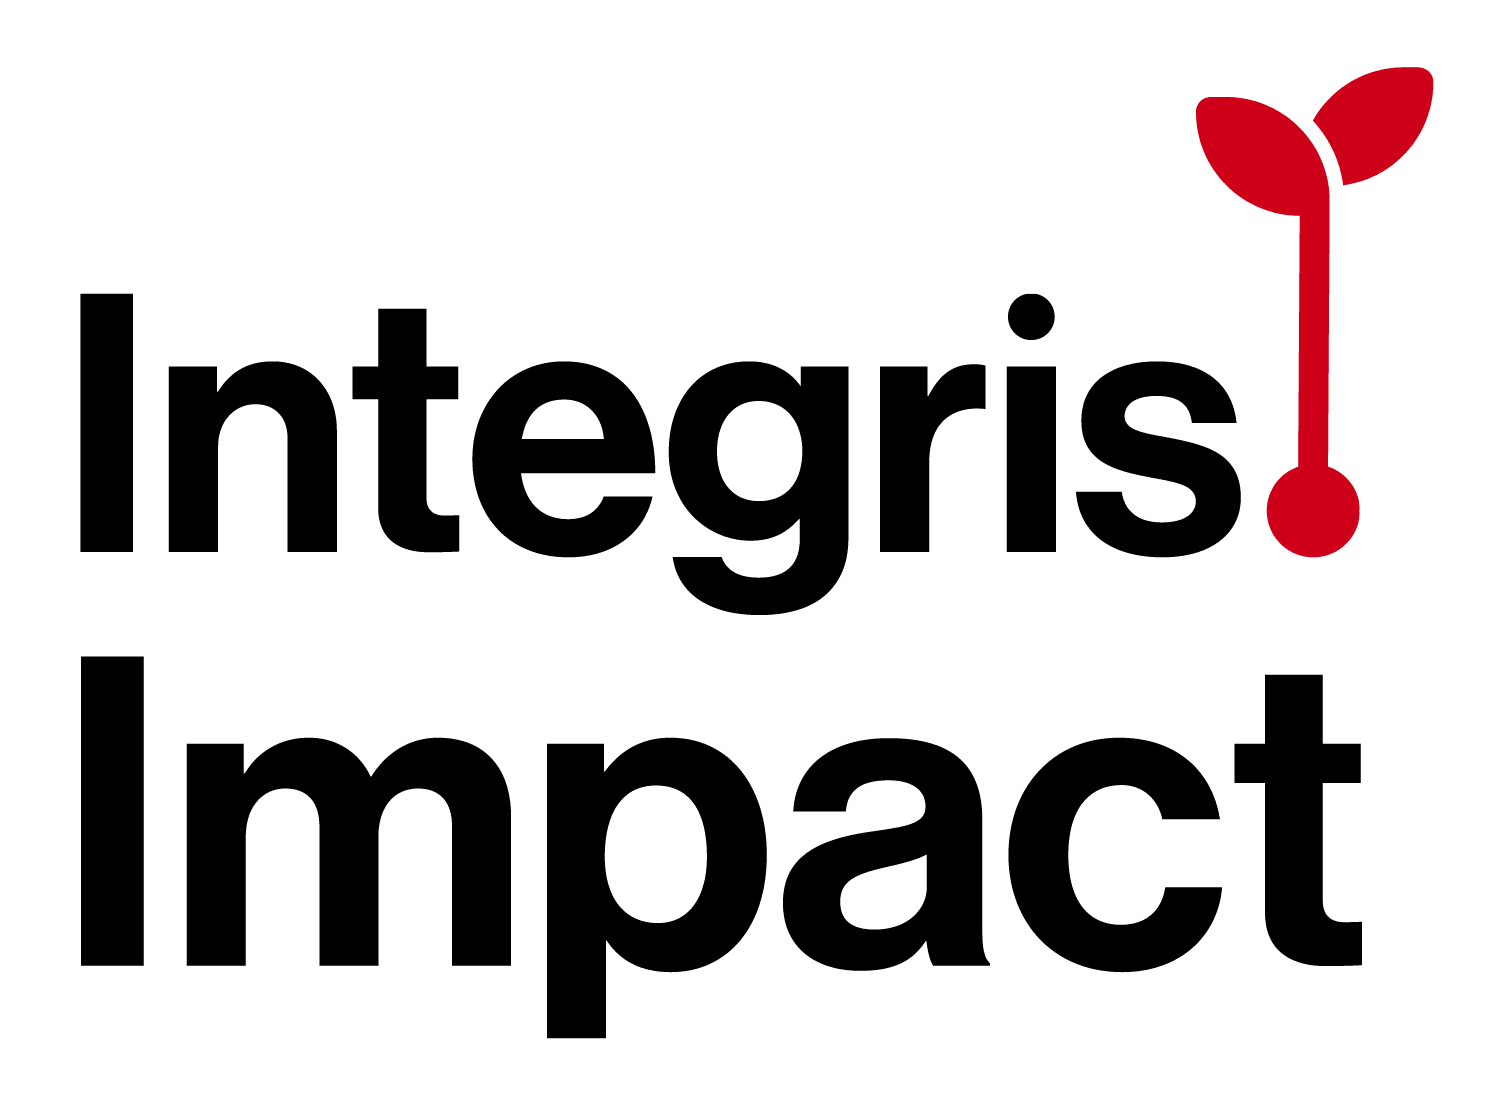 Logo with the words "Integris Impact" in black text. A small red plant sprout symbol extends from the letter "I" in "Impact".